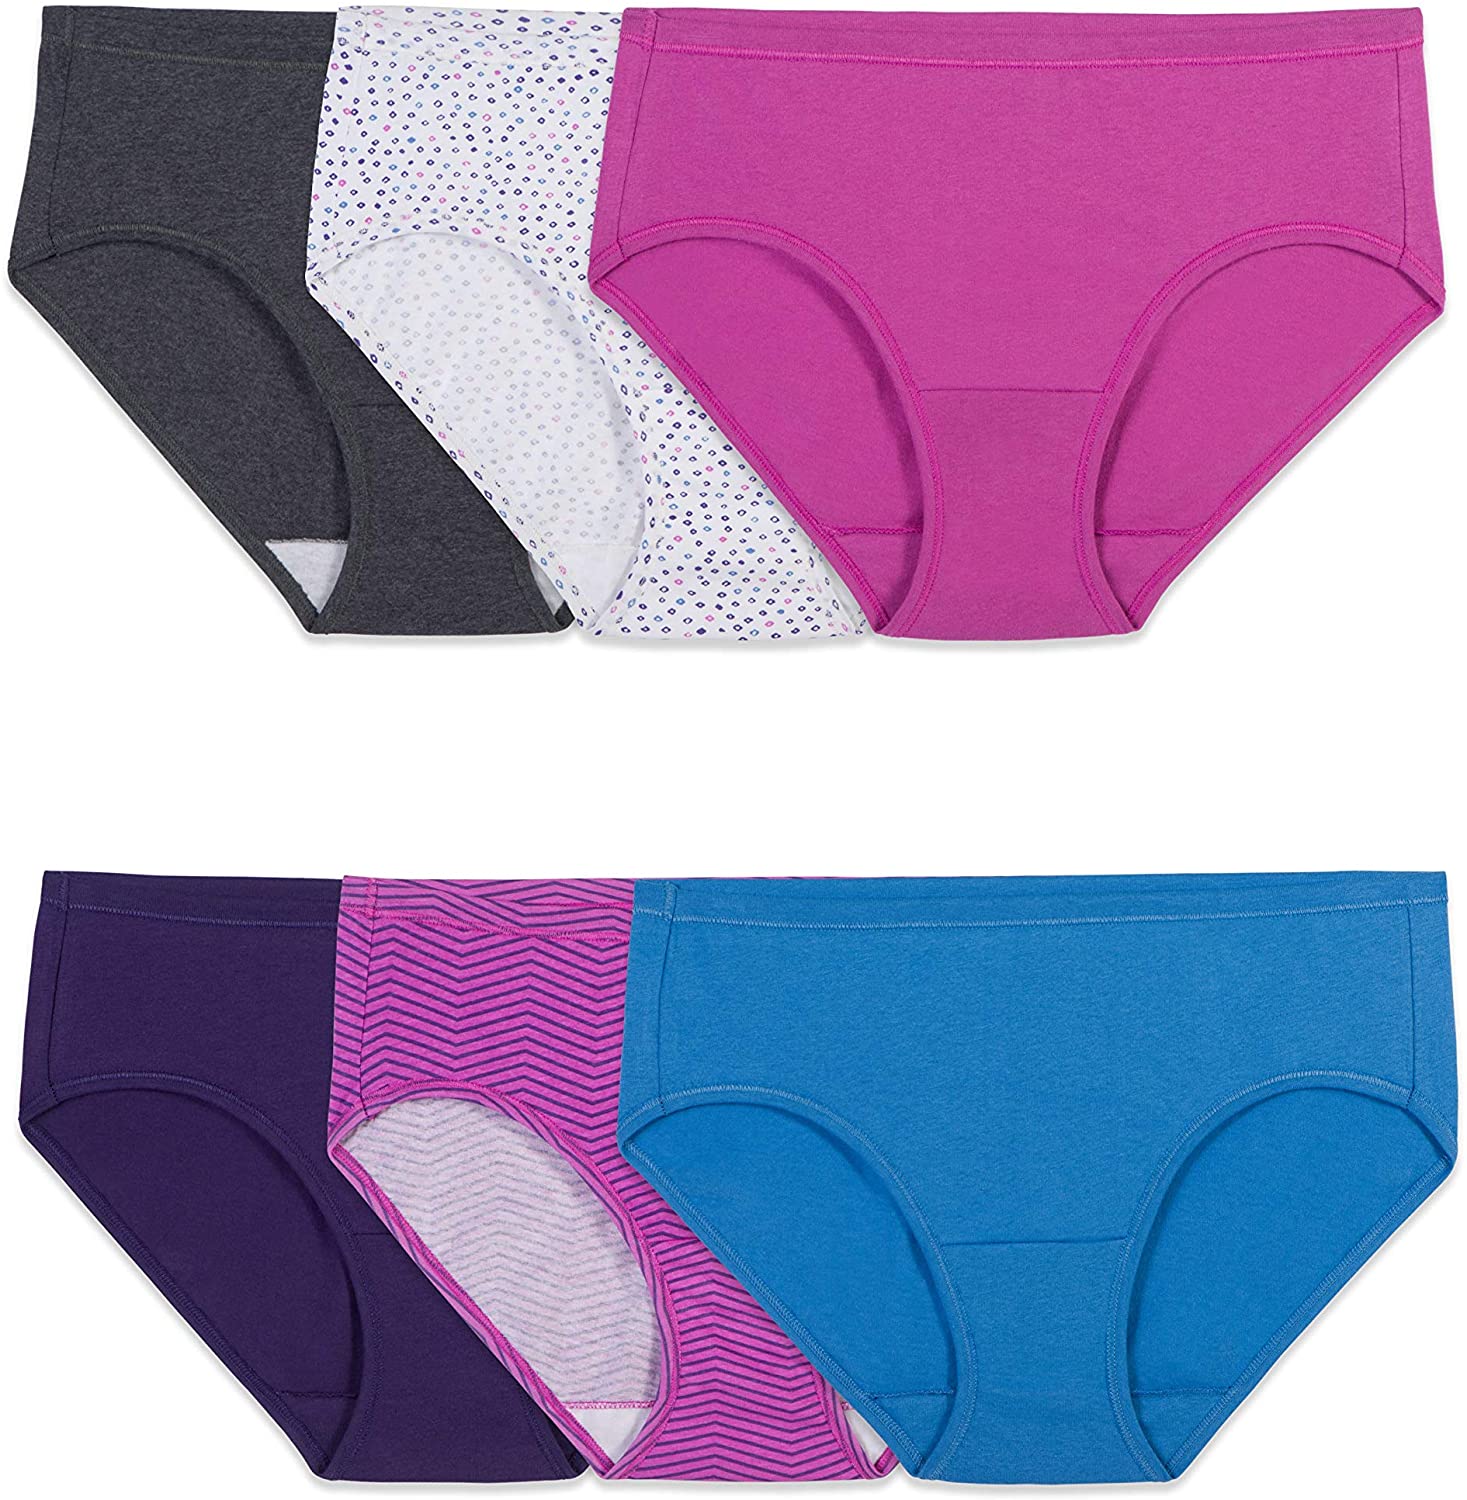 Fruit of the Loom Women's Cotton Low Rise Briefs, 6-Pack 